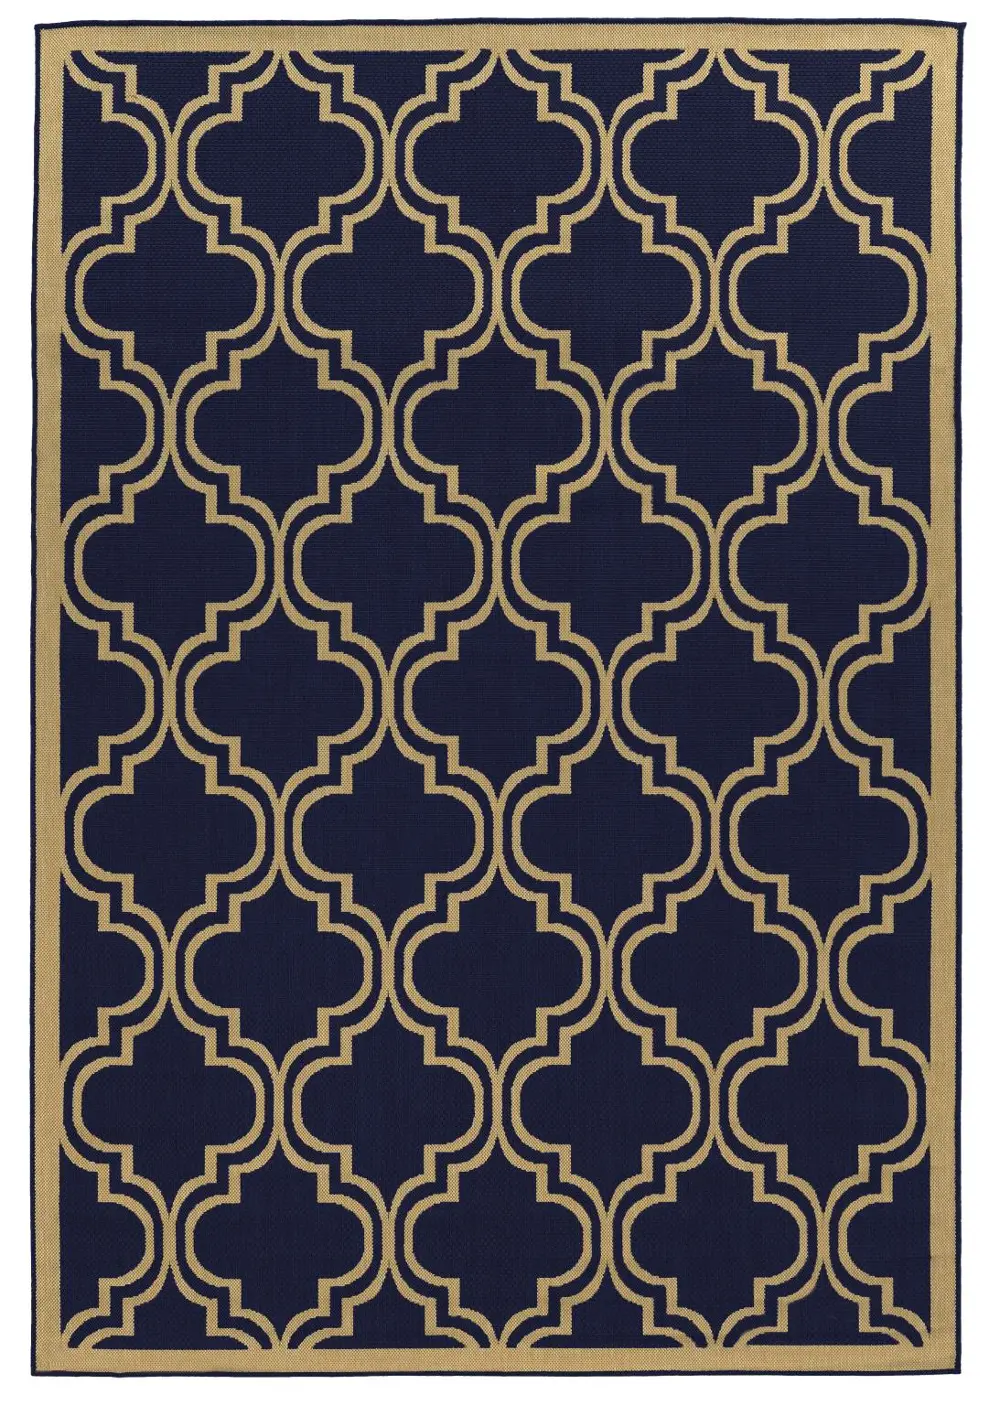 7 x 10 Large Navy Blue Outdoor Rug - Innovations-1